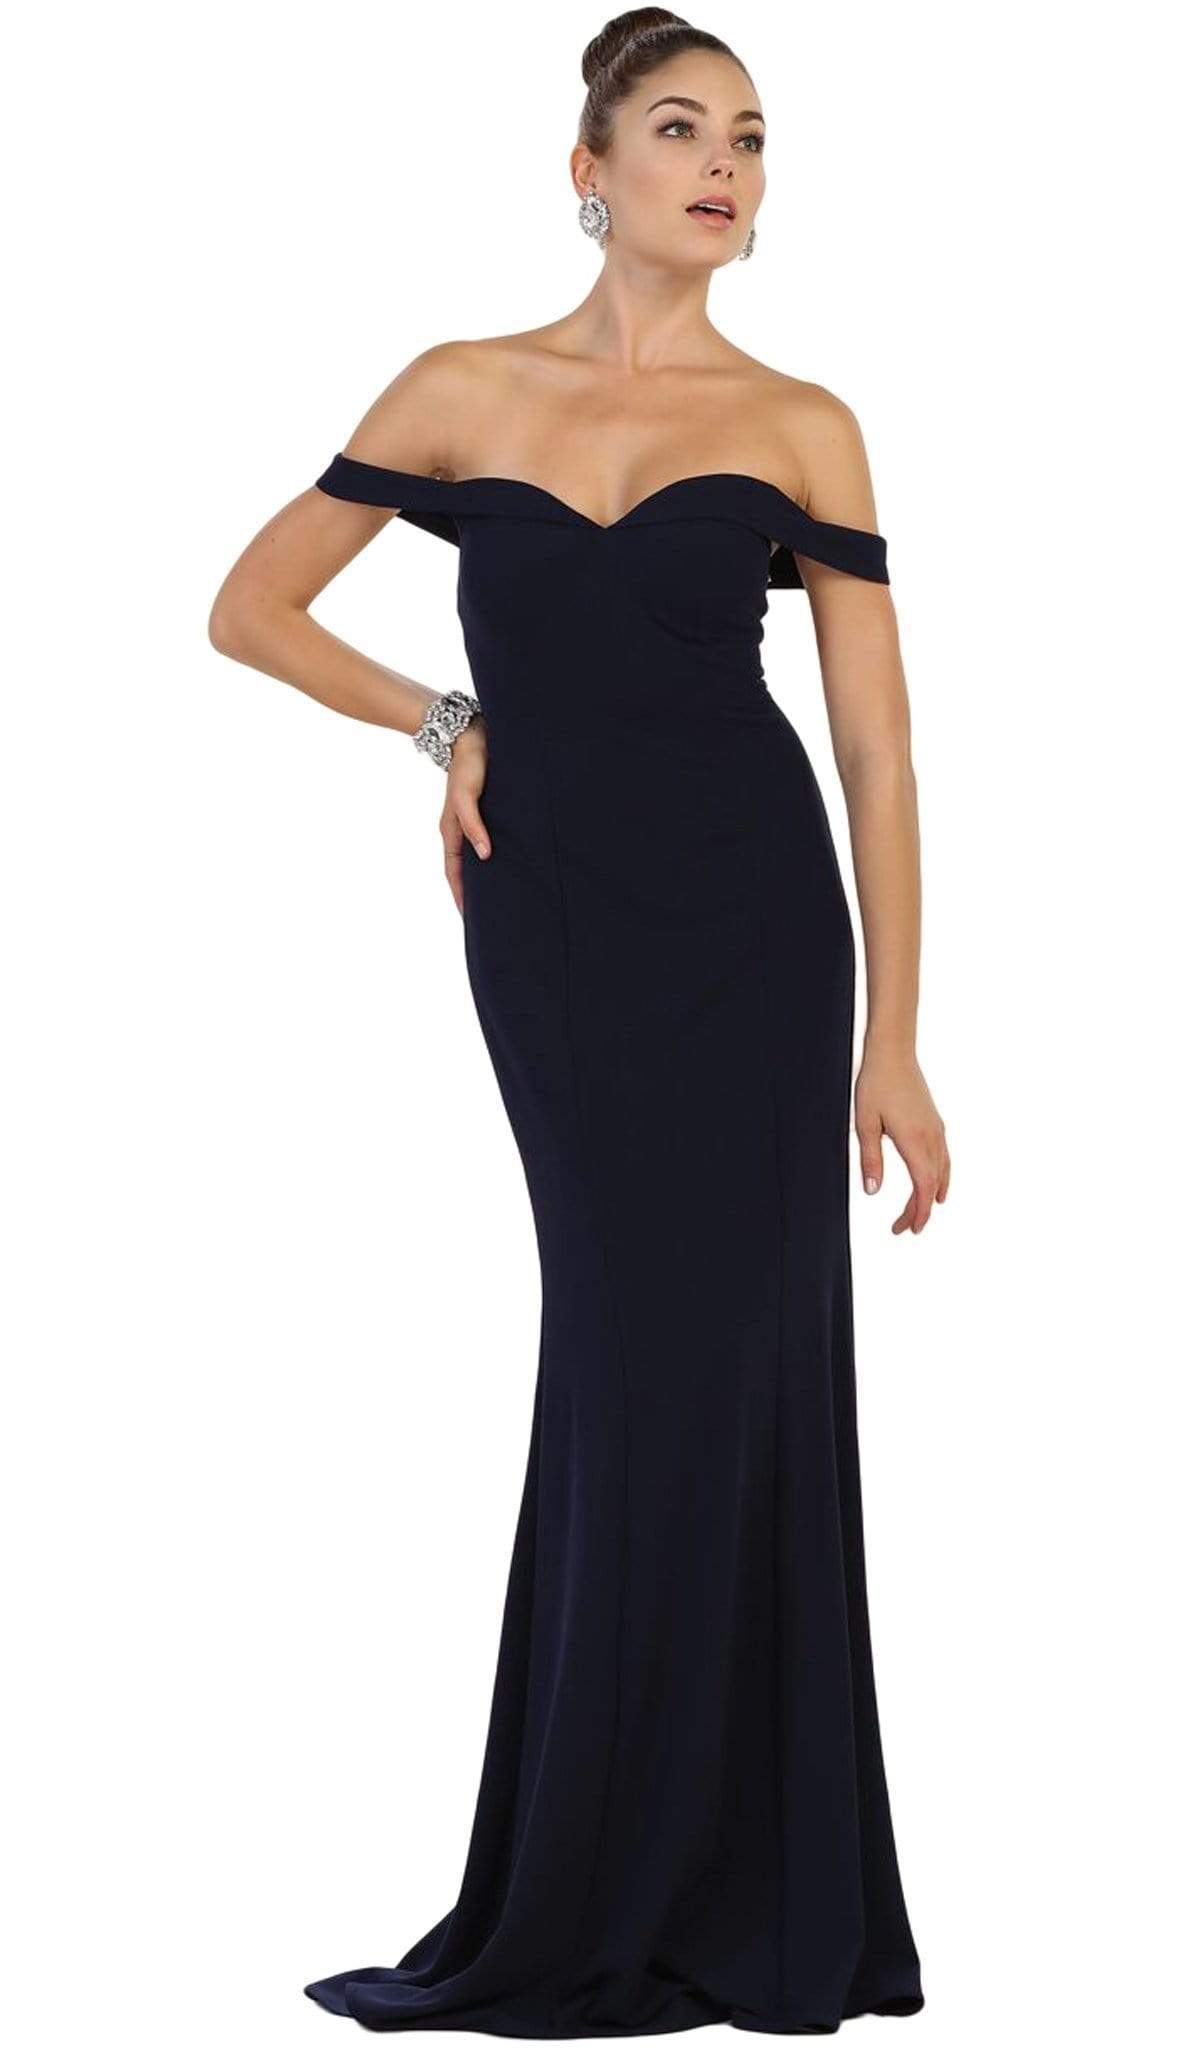 May Queen - Fold over Off-Shoulder Sheath Dress
